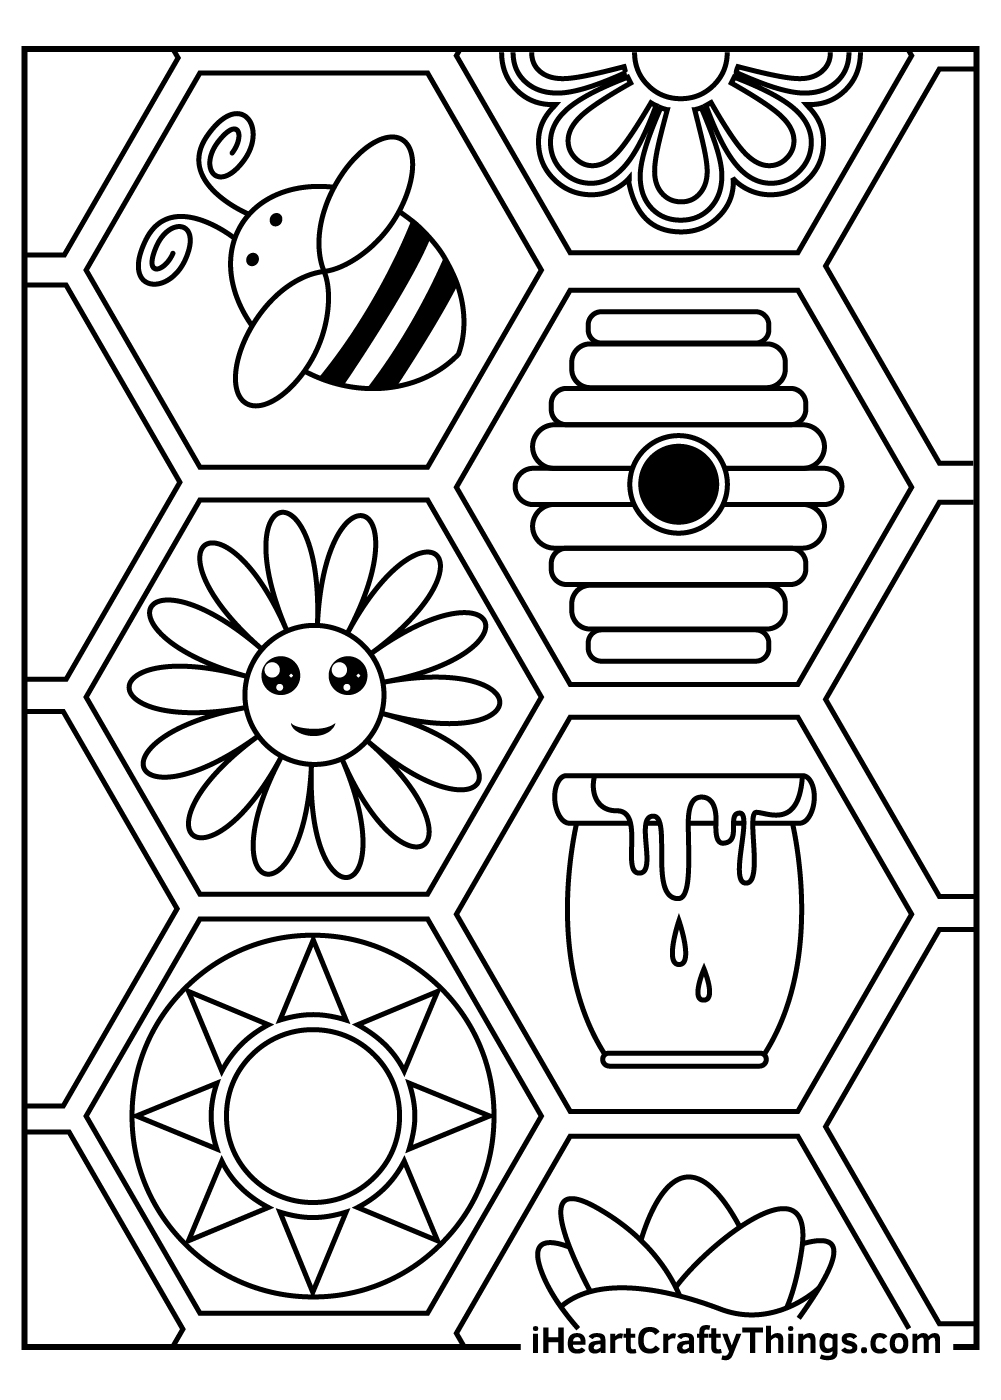 hexagon-23-for-kids-coloring-pages-coloring-cool